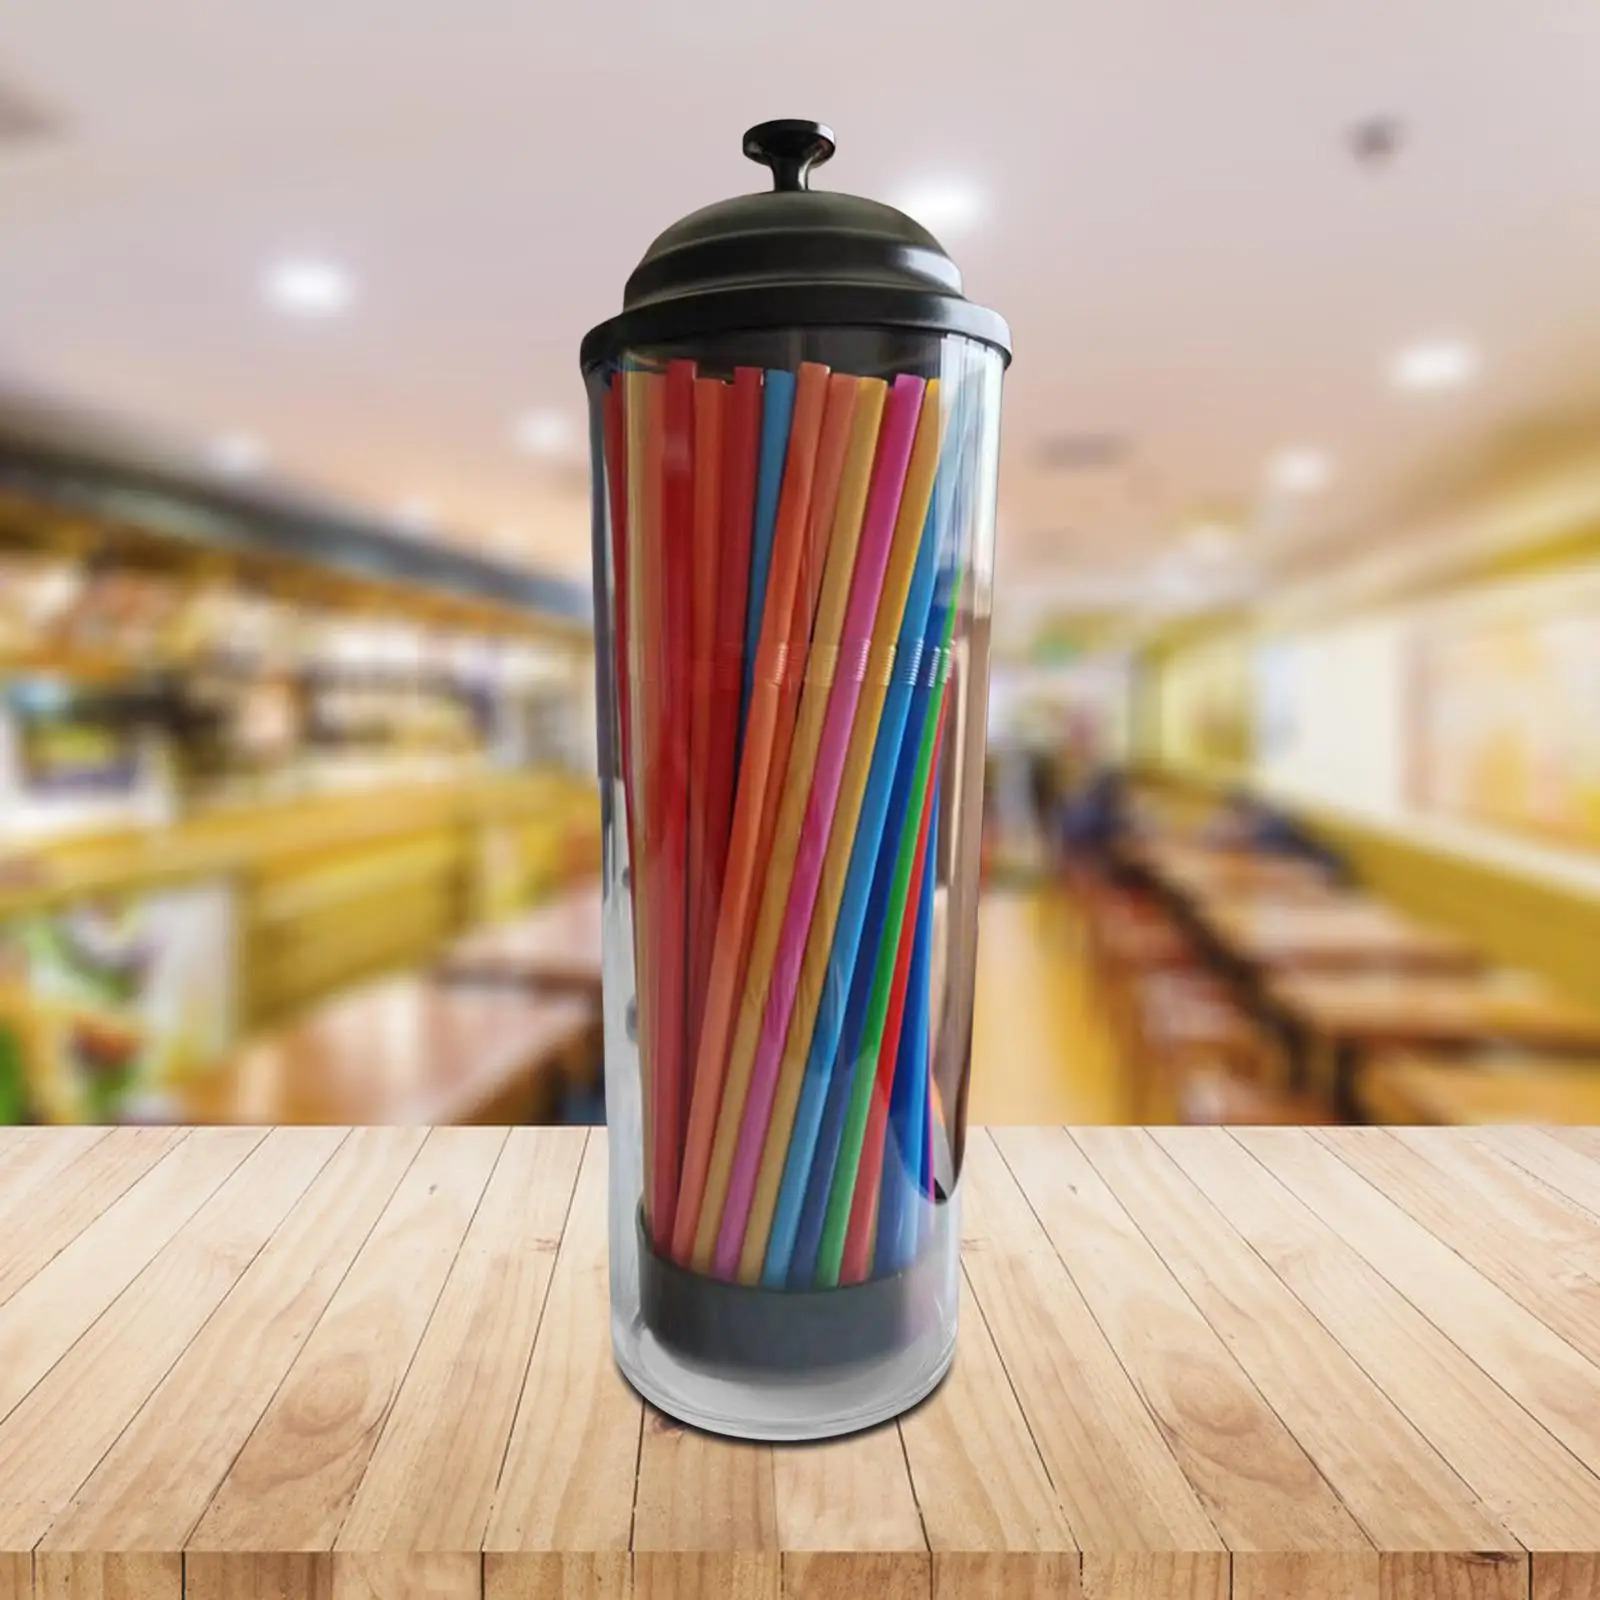 Drinking Straw Organizer Container Drinking Straw Dispenser Straw Dispenser Straw Holder with Lid for Store Home Dining Room